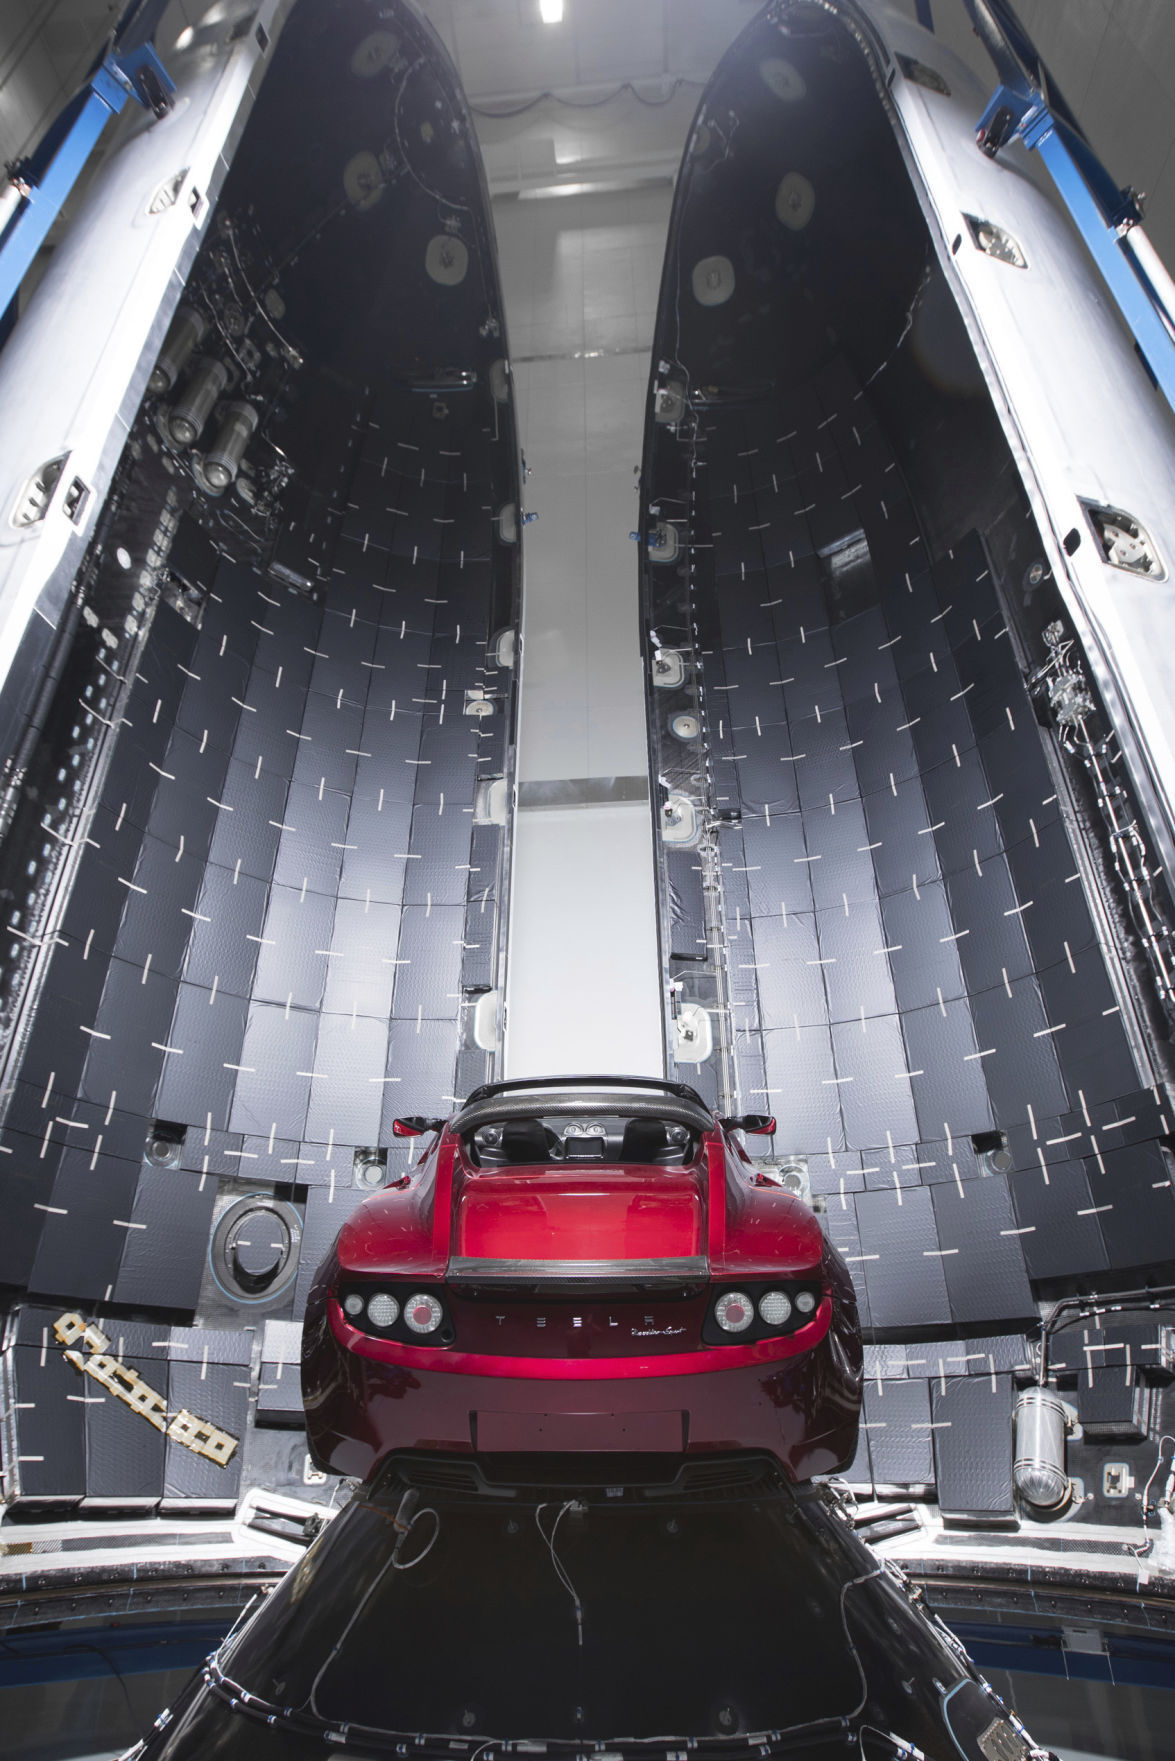 A Tesla Is In Space But Some Nebraska Car Buffs Say A